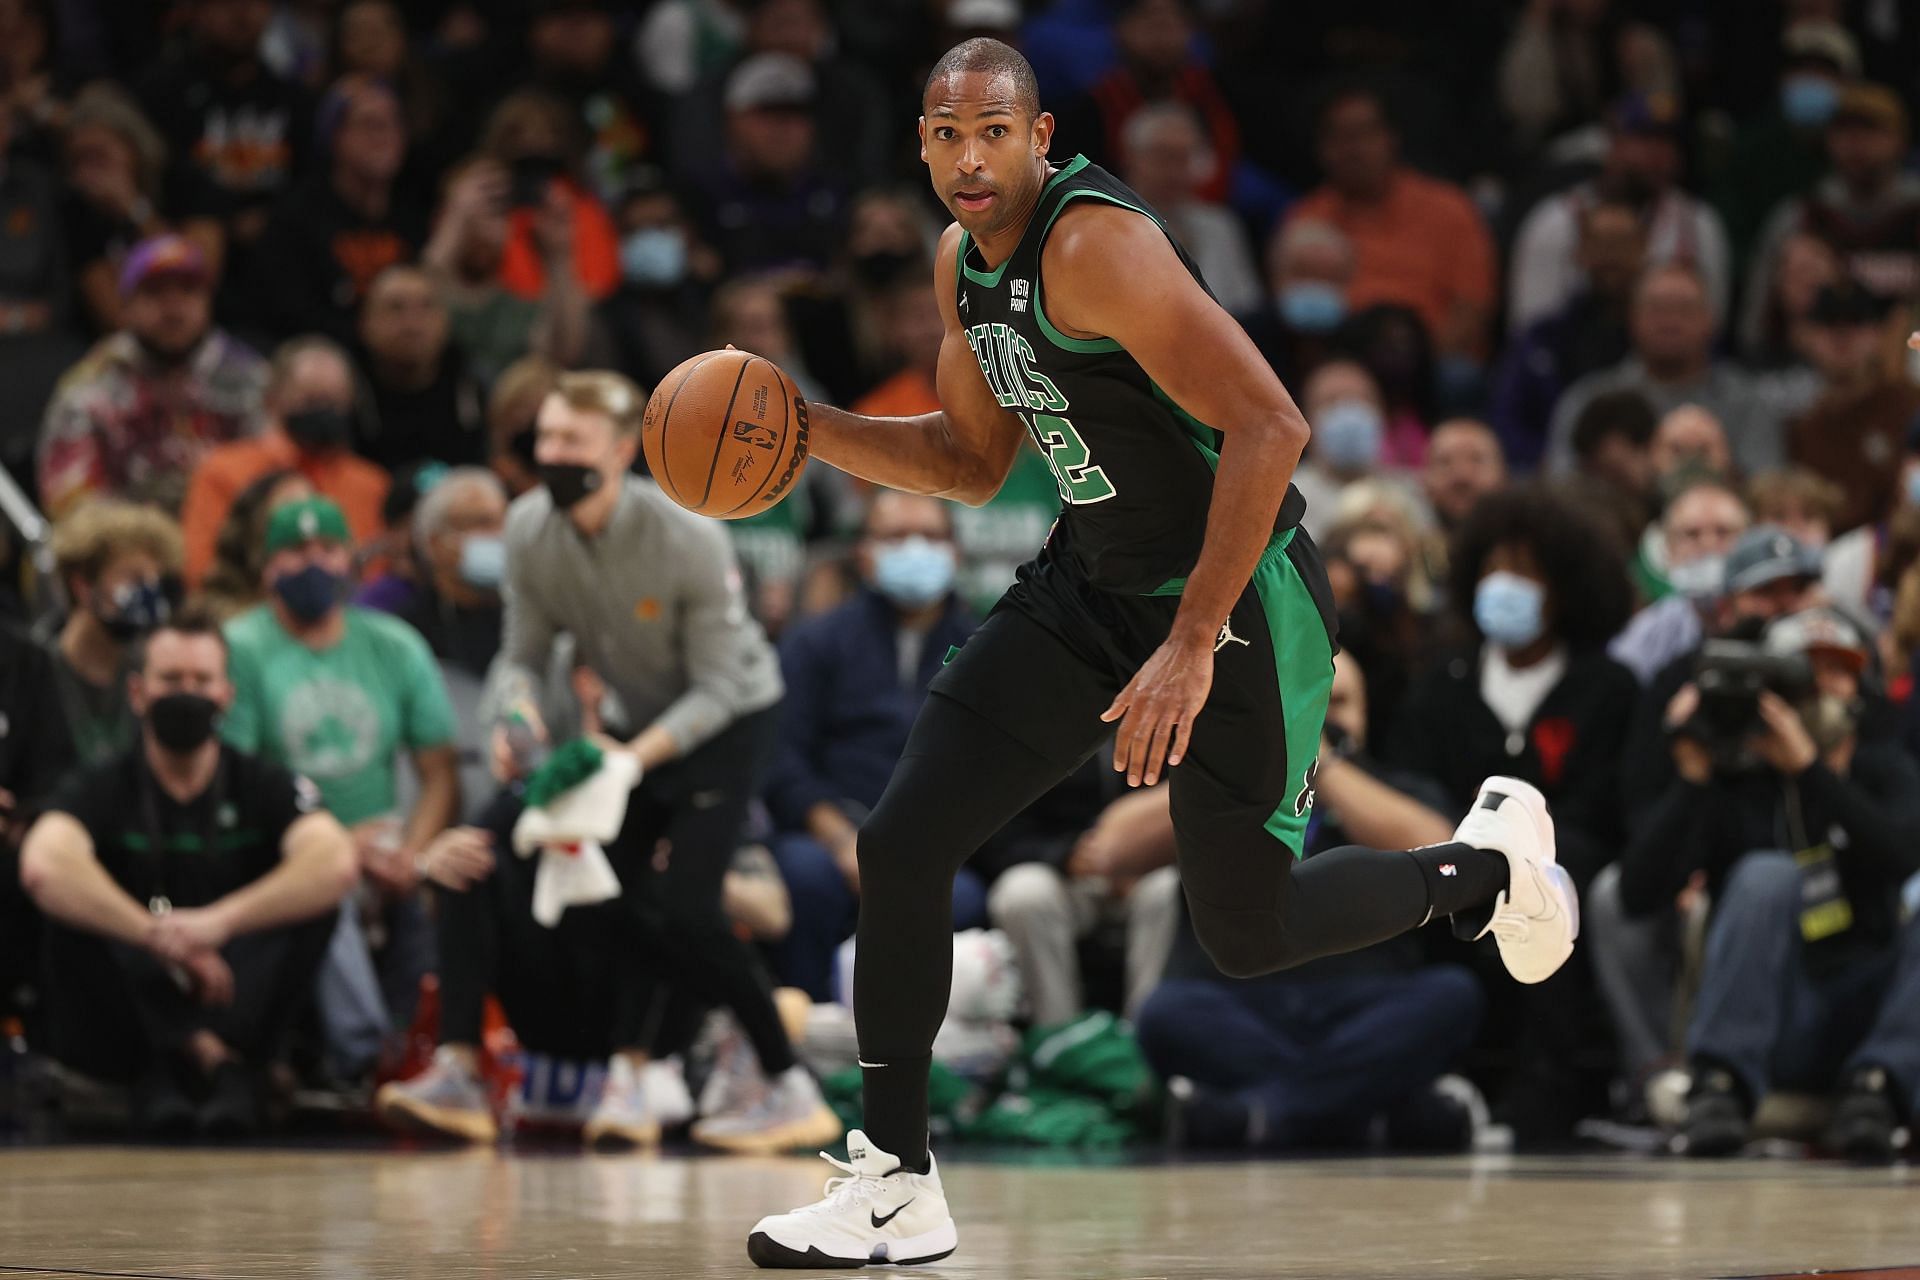 Al Horford scans the floor to make a play